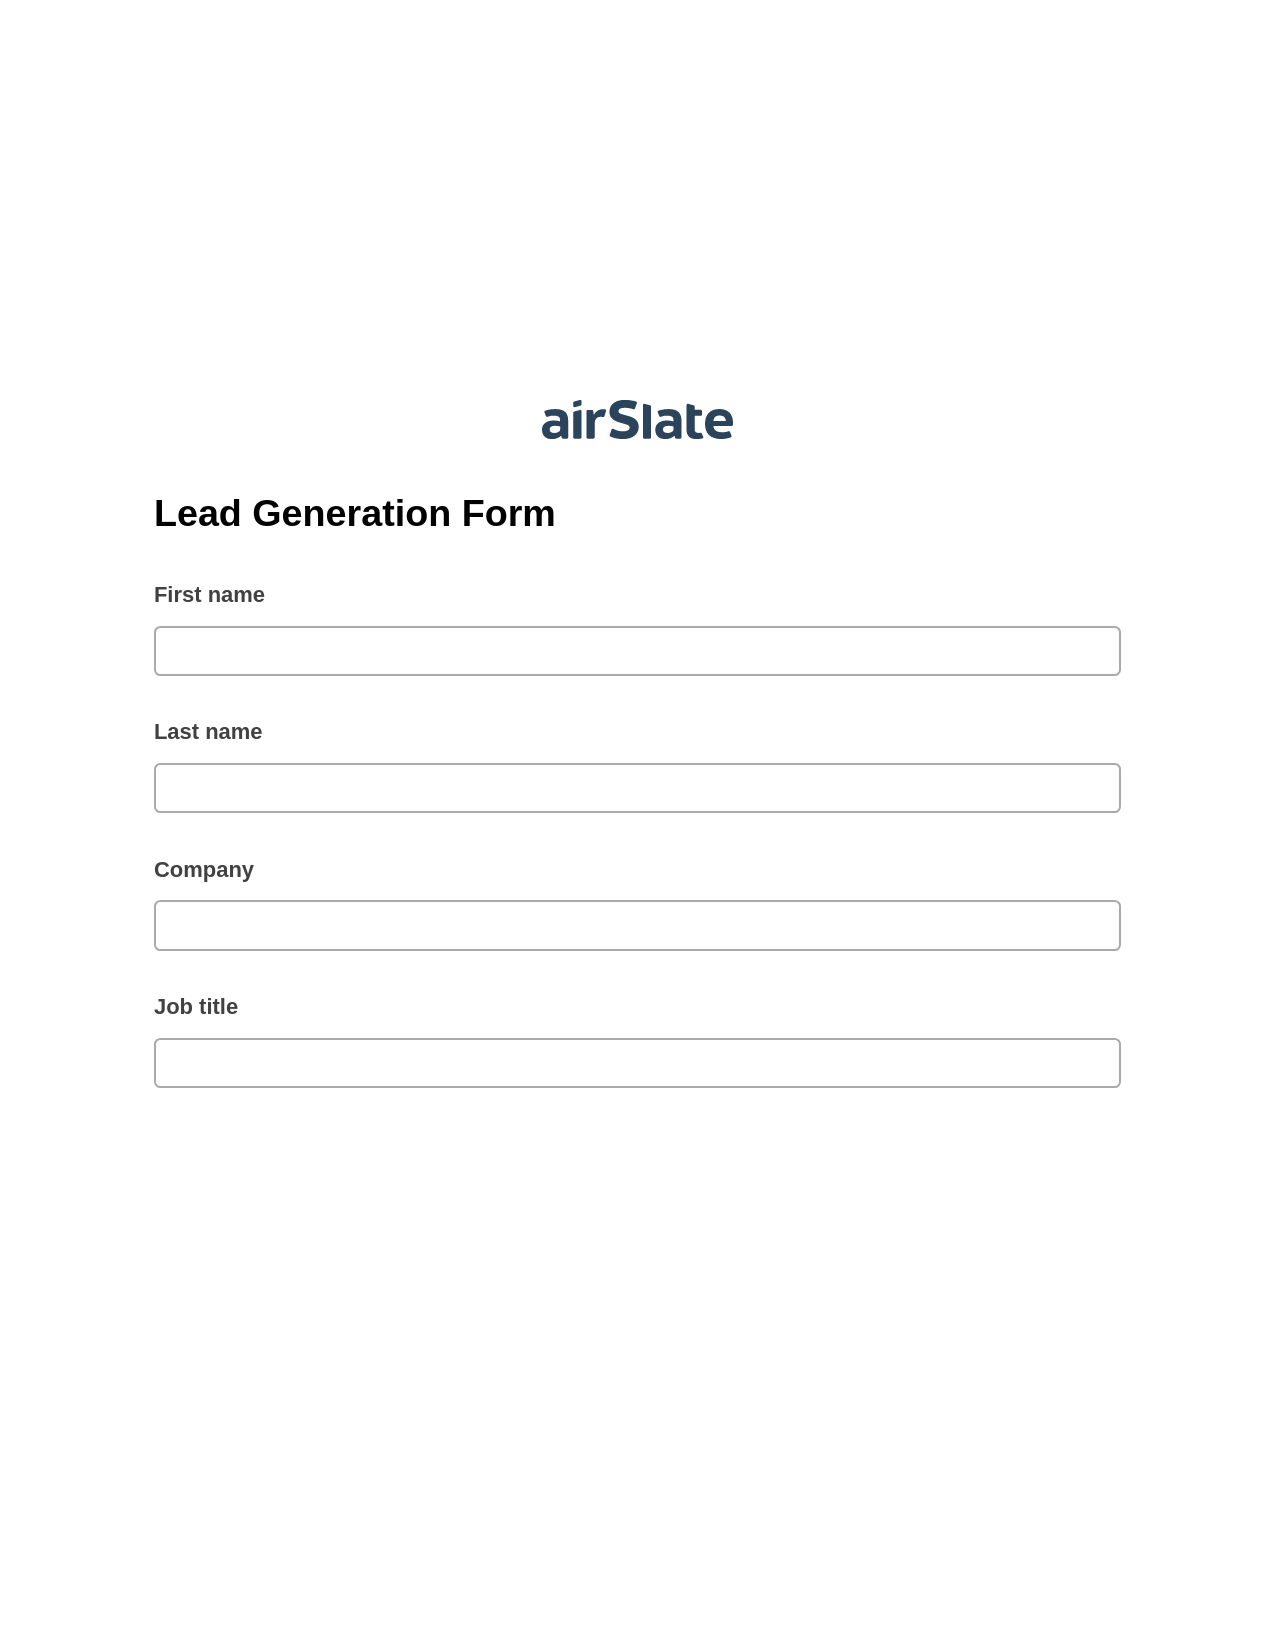 Lead Generation Form Pre-fill Document Bot, Send a Slate to Salesforce Contact Bot, Export to Excel 365 Bot